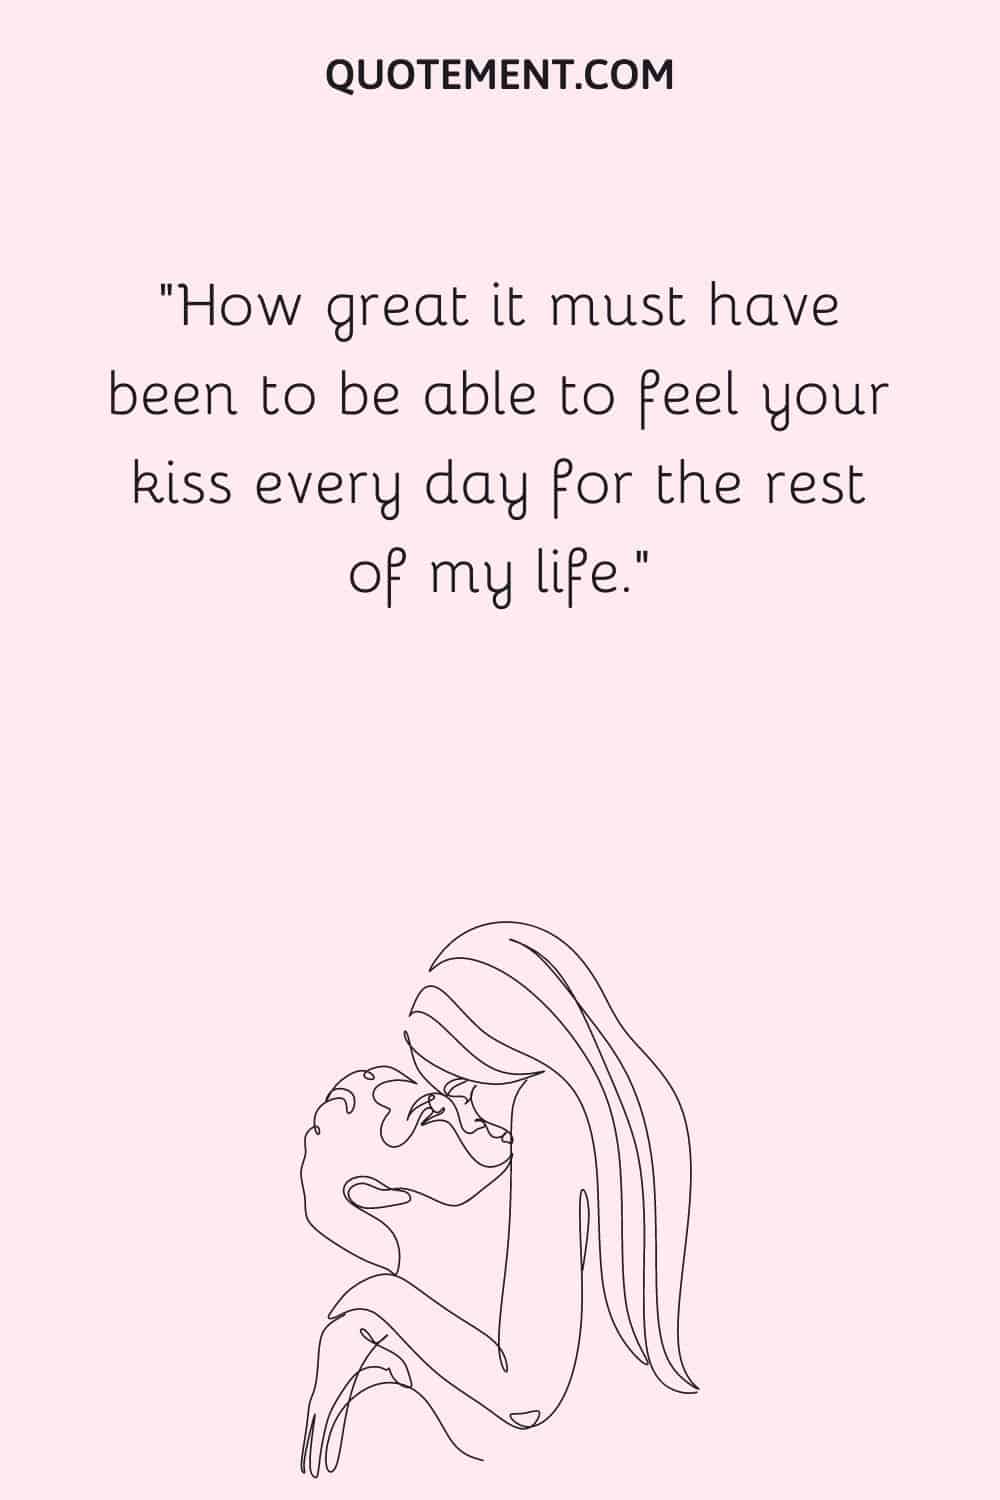 How great it must have been to be able to feel your kiss every day for the rest of my life.